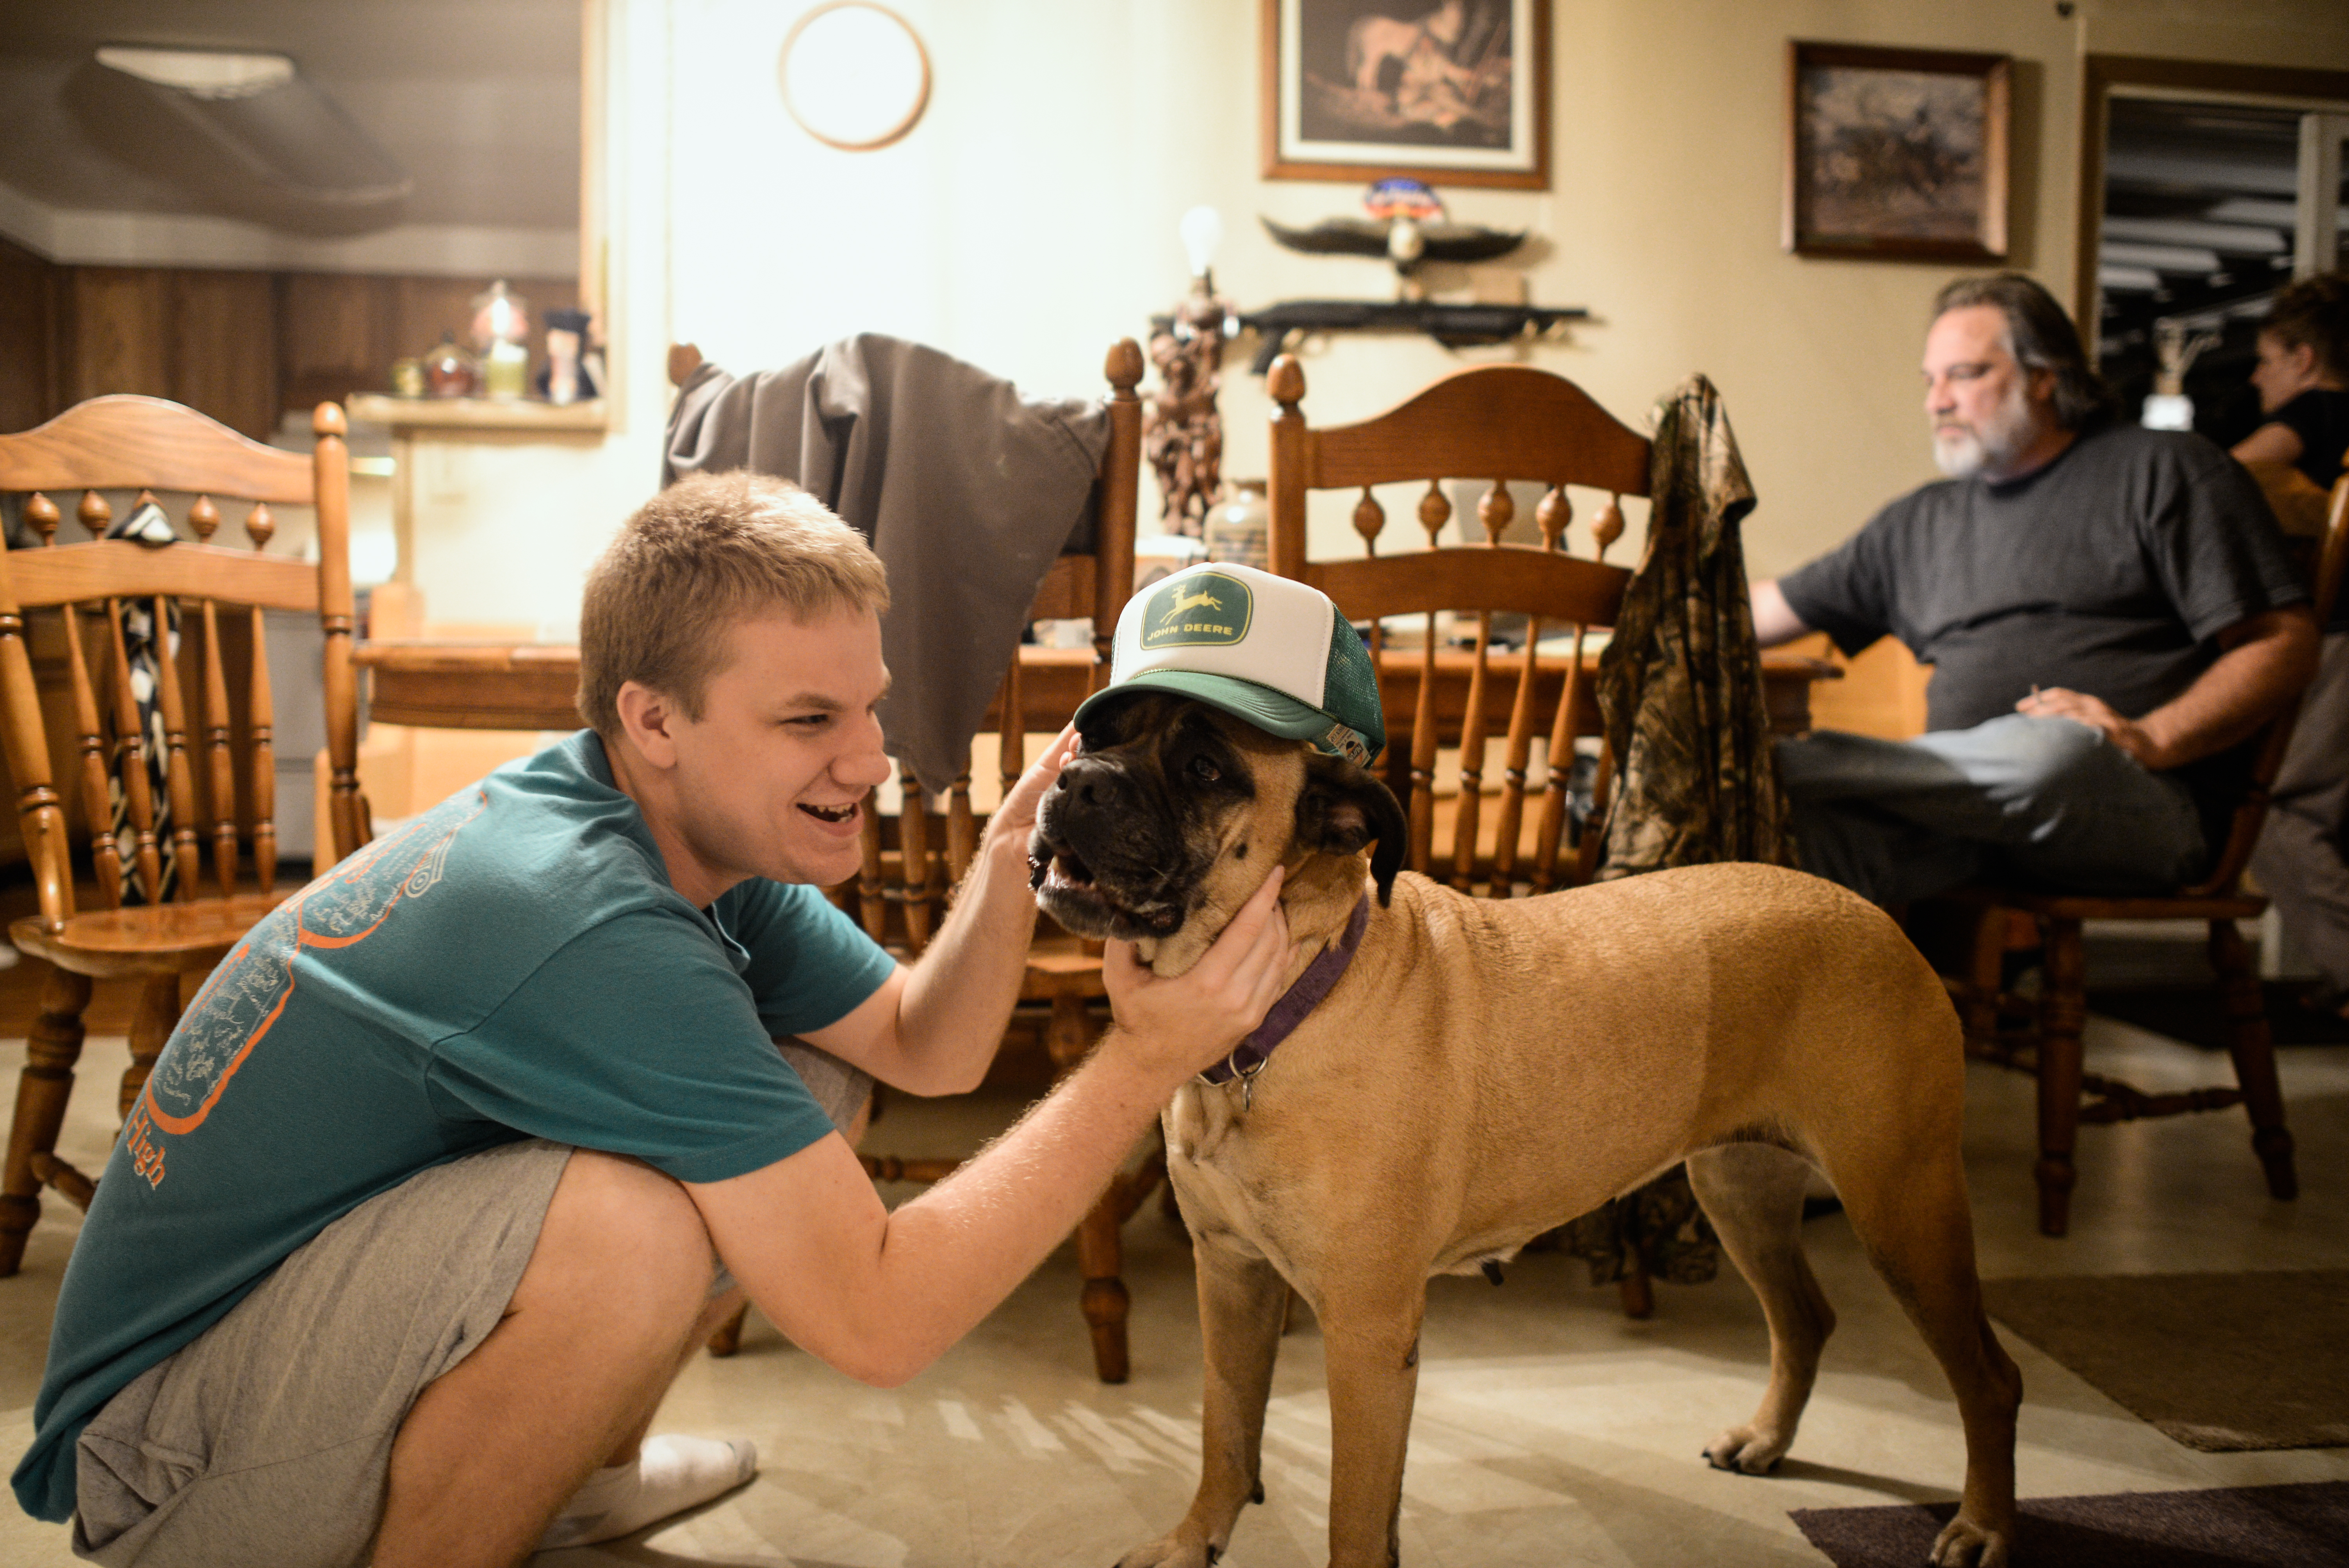  Trenton, Missouri. 2013.  Dalton shares a playful moment with his family dog, Roxy. The family dogs are a source of comfort for him. 